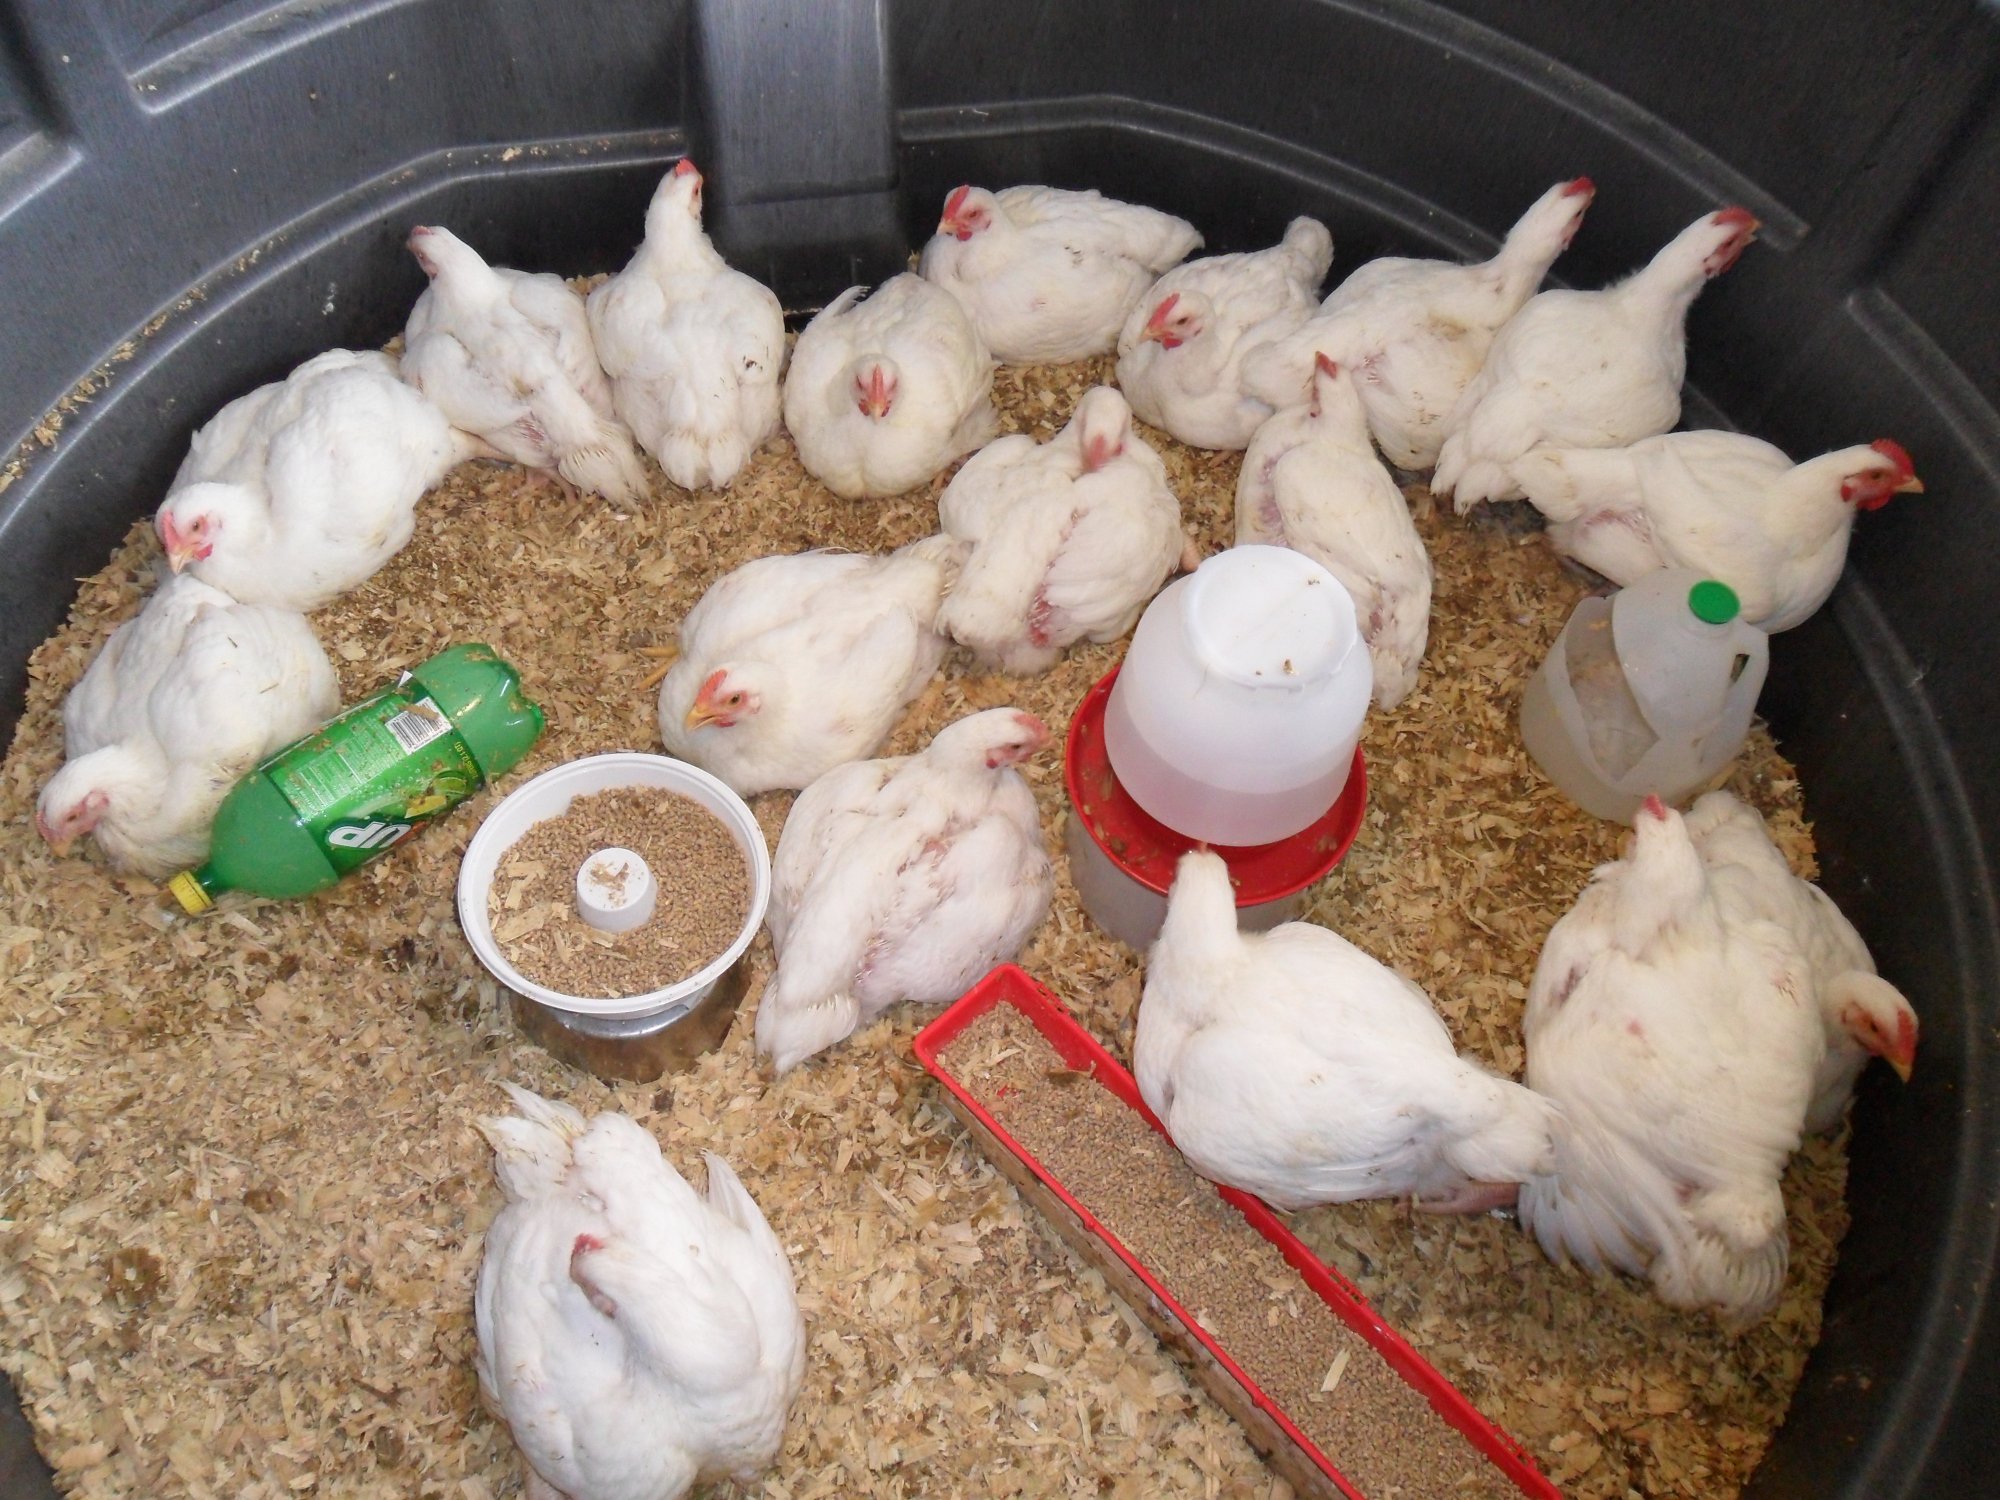 How To Raise Chickens For Meat Tips And Pictures Backyard Chickens Learn How To Raise Chickens